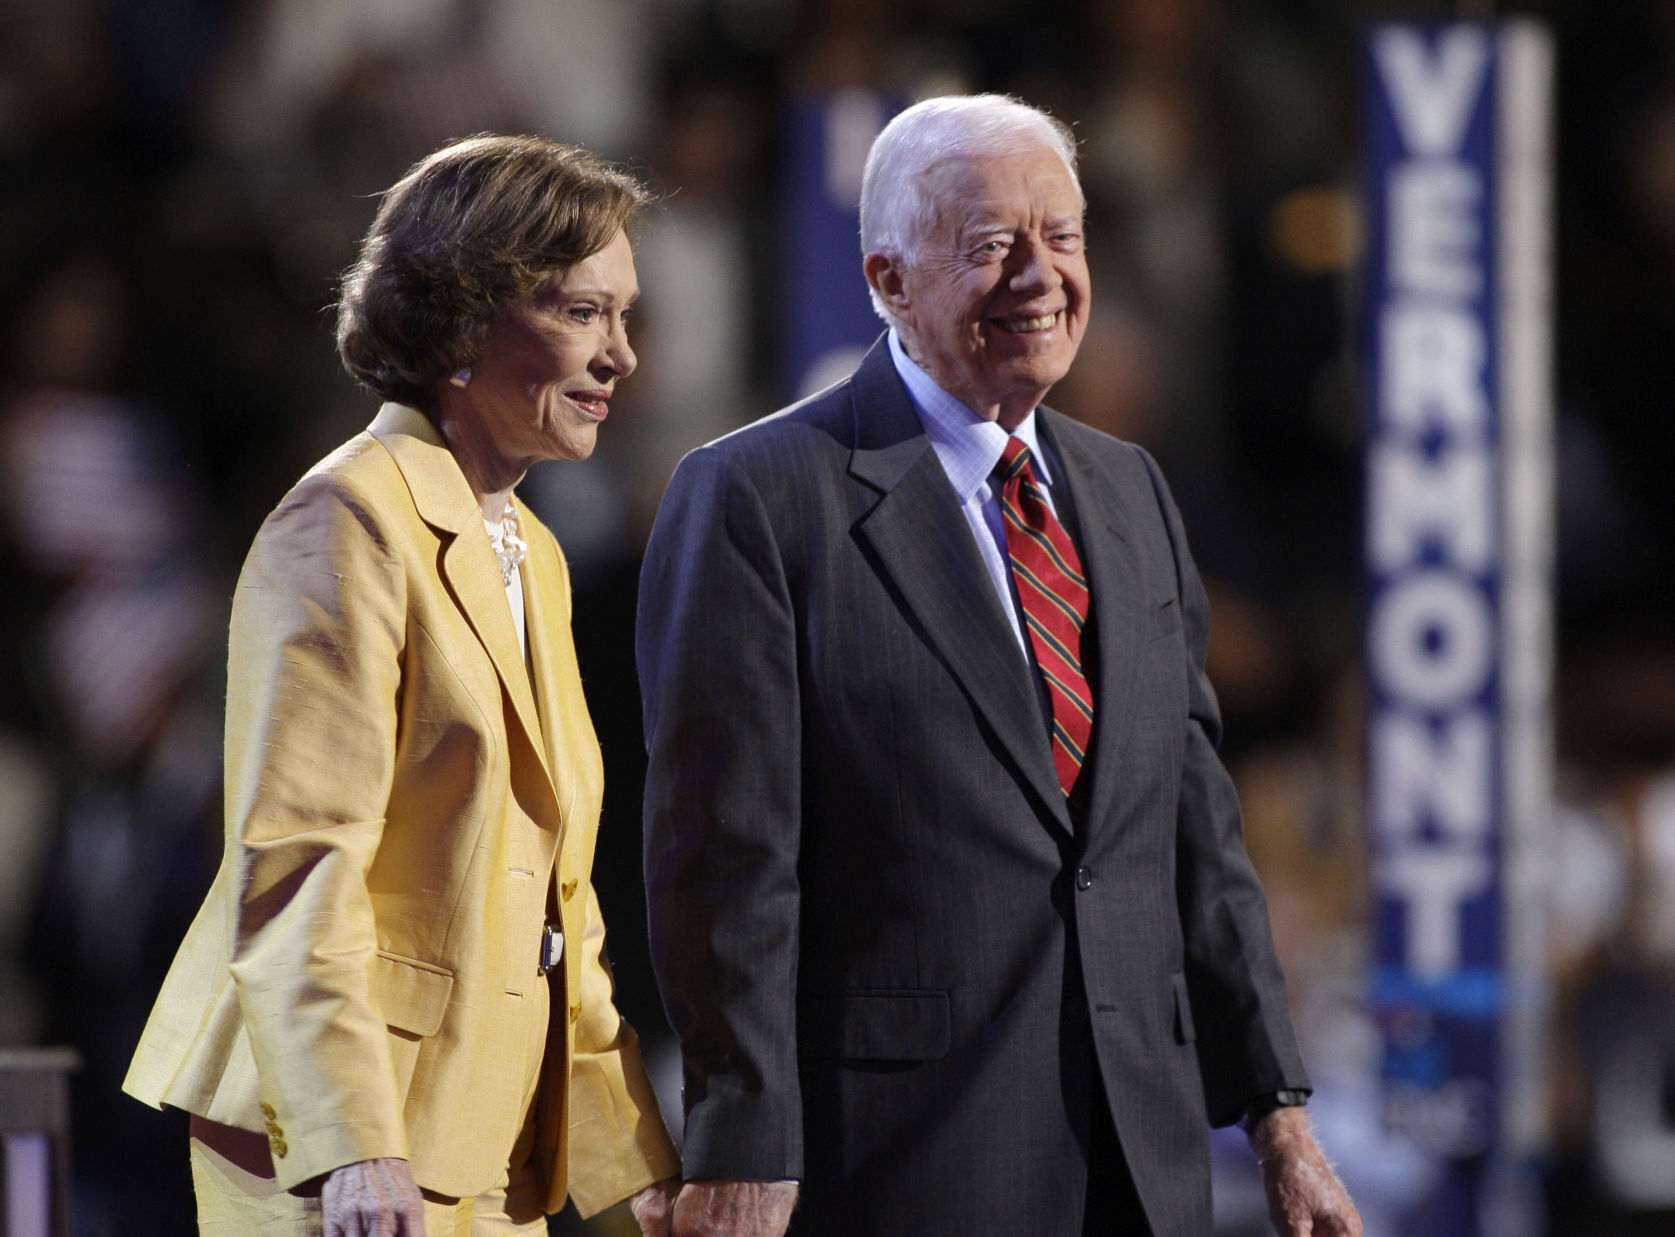 Former President Jimmy Carter enters hospice care, Alex Murdaugh testifies in court, and more of the weeks top stories